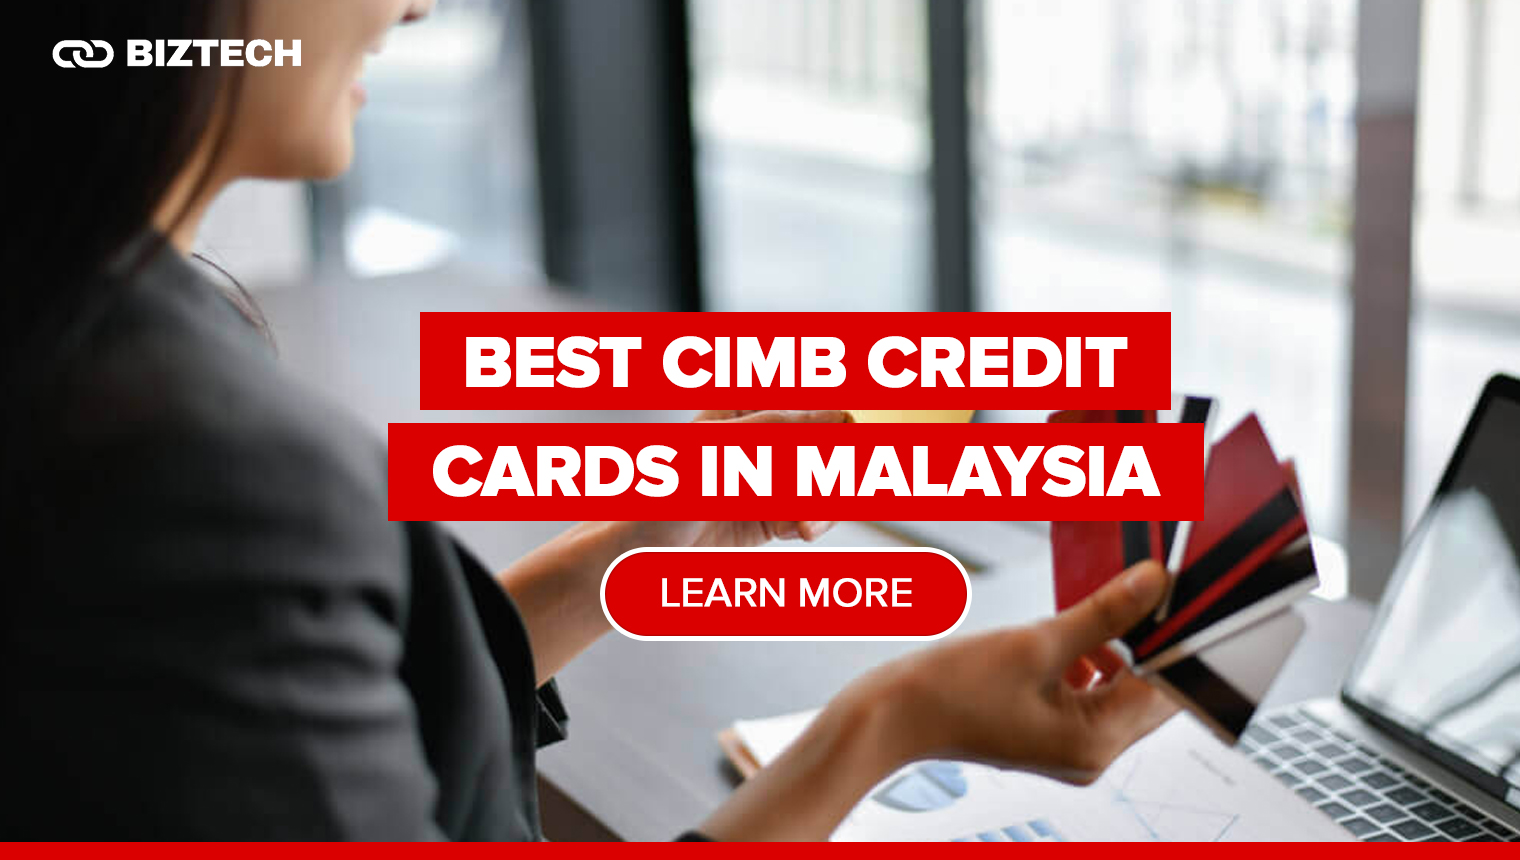 Best CIMB Credit Cards in Malaysia